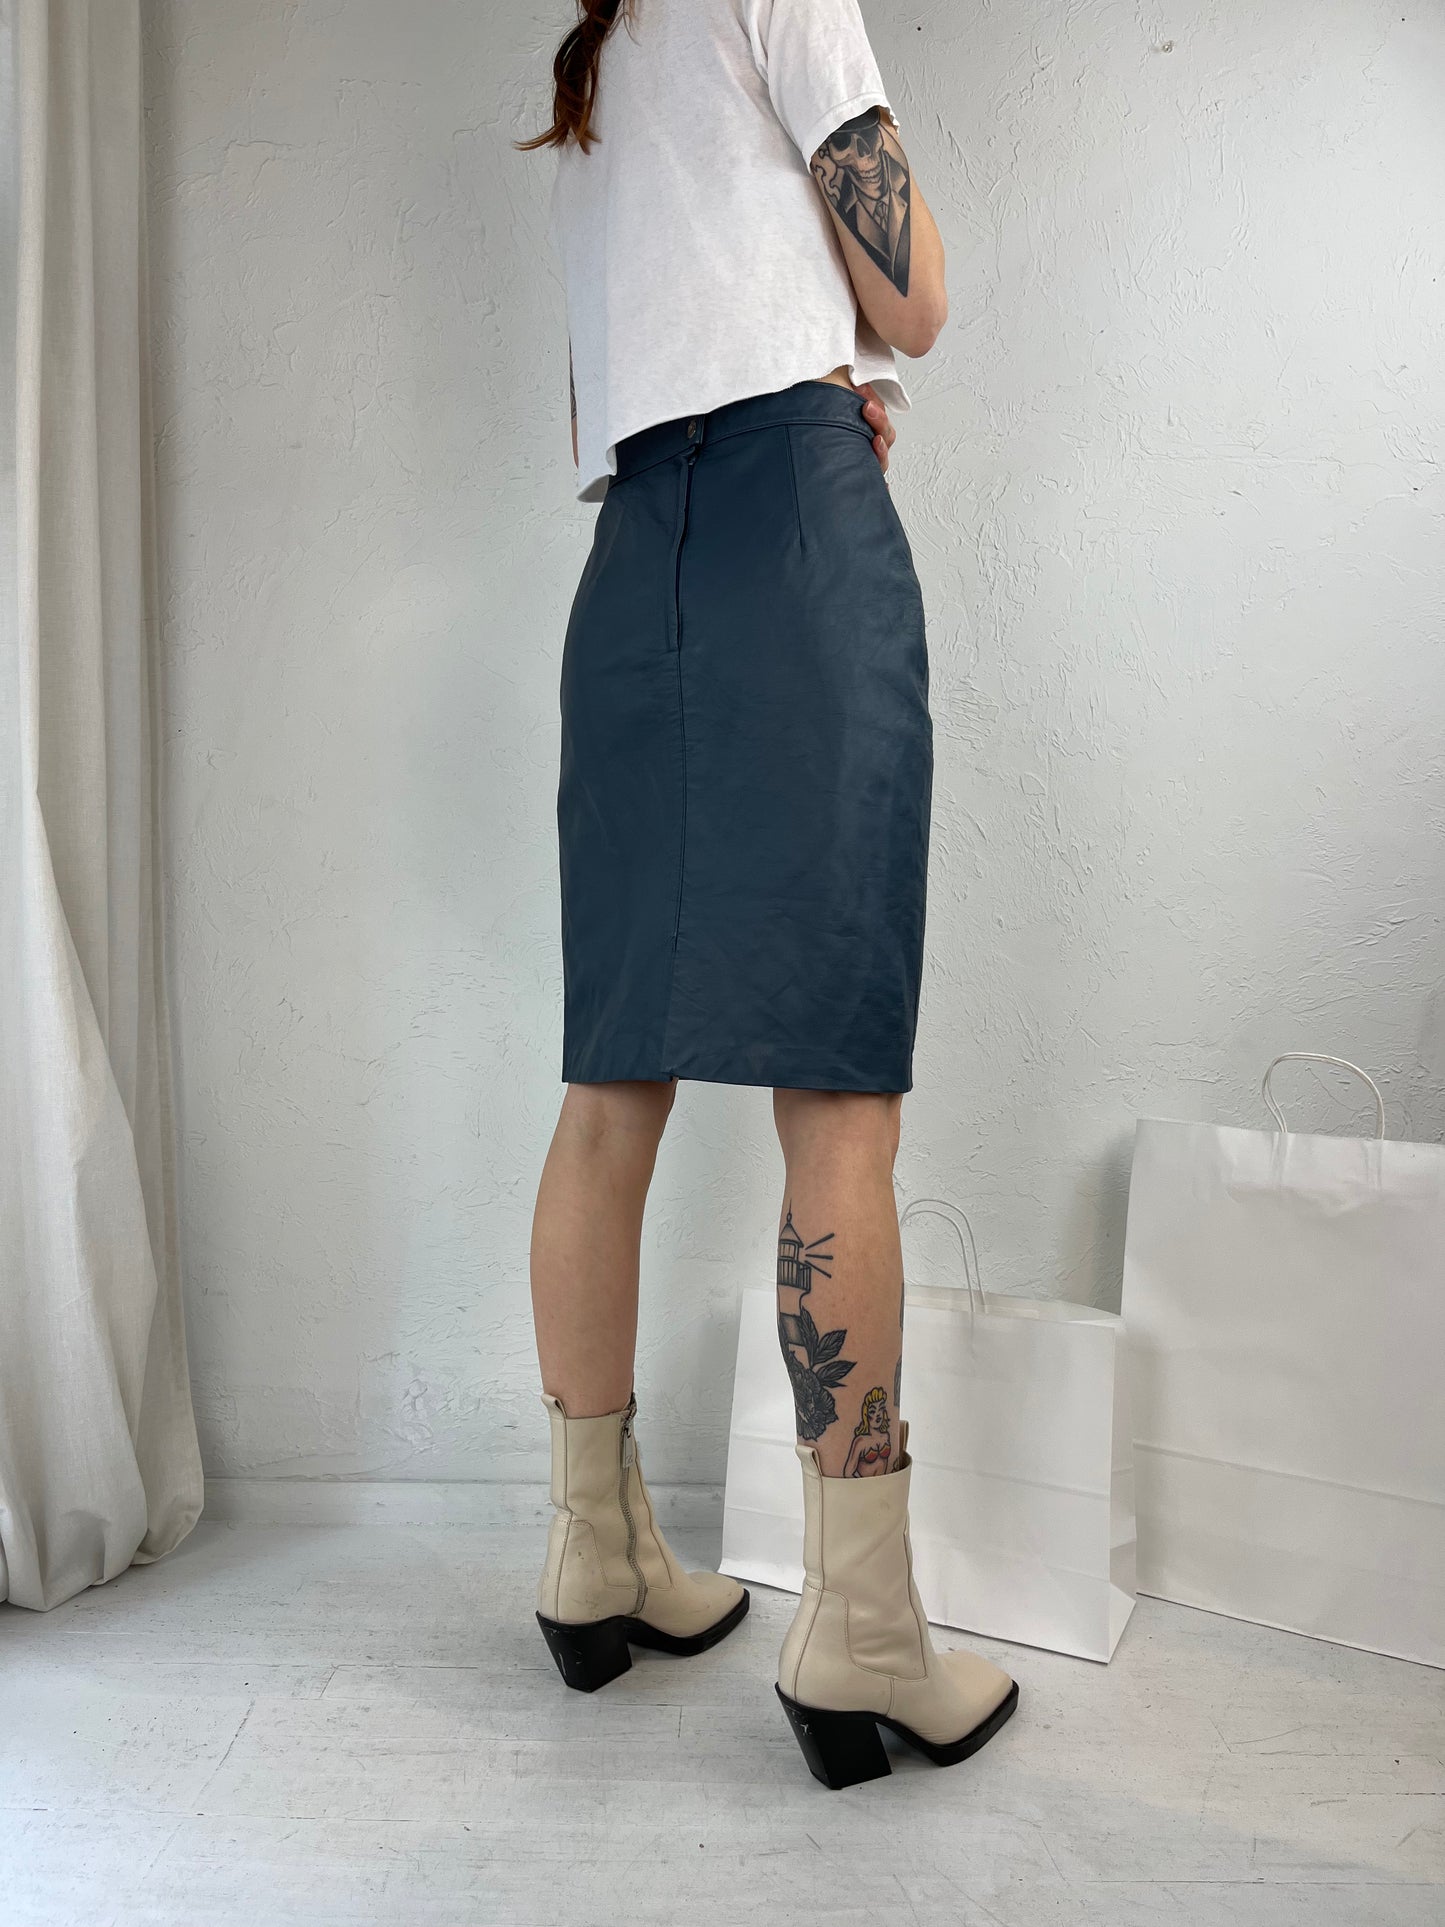 90s 'Ocean West' Blue Leather Pencil Skirt / Small